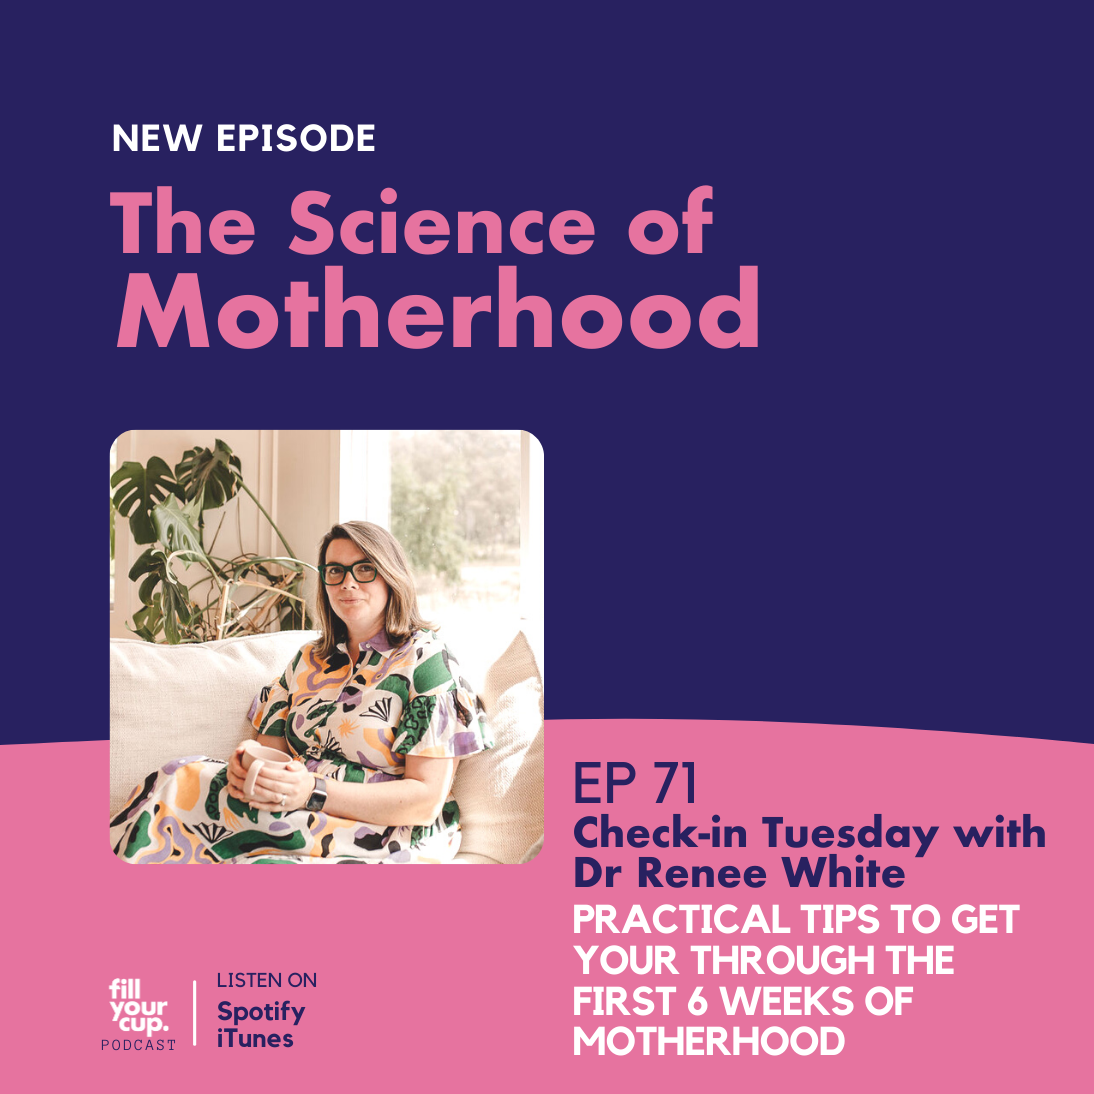 Ep 71. Check In Tuesday with Dr Renee White - Practical Tips to Get You Through the First 6 weeks of Motherhood